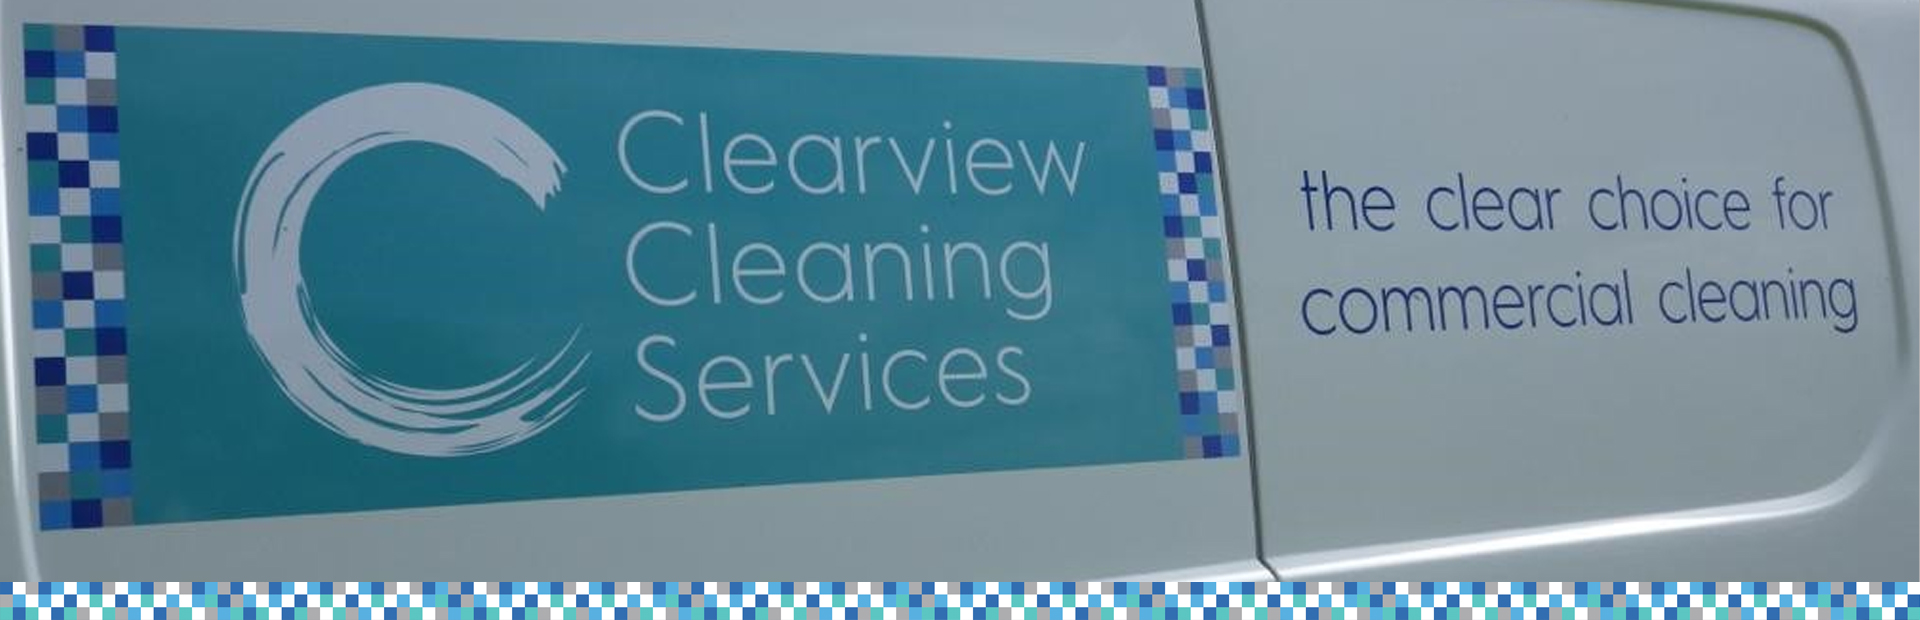 clearview vet